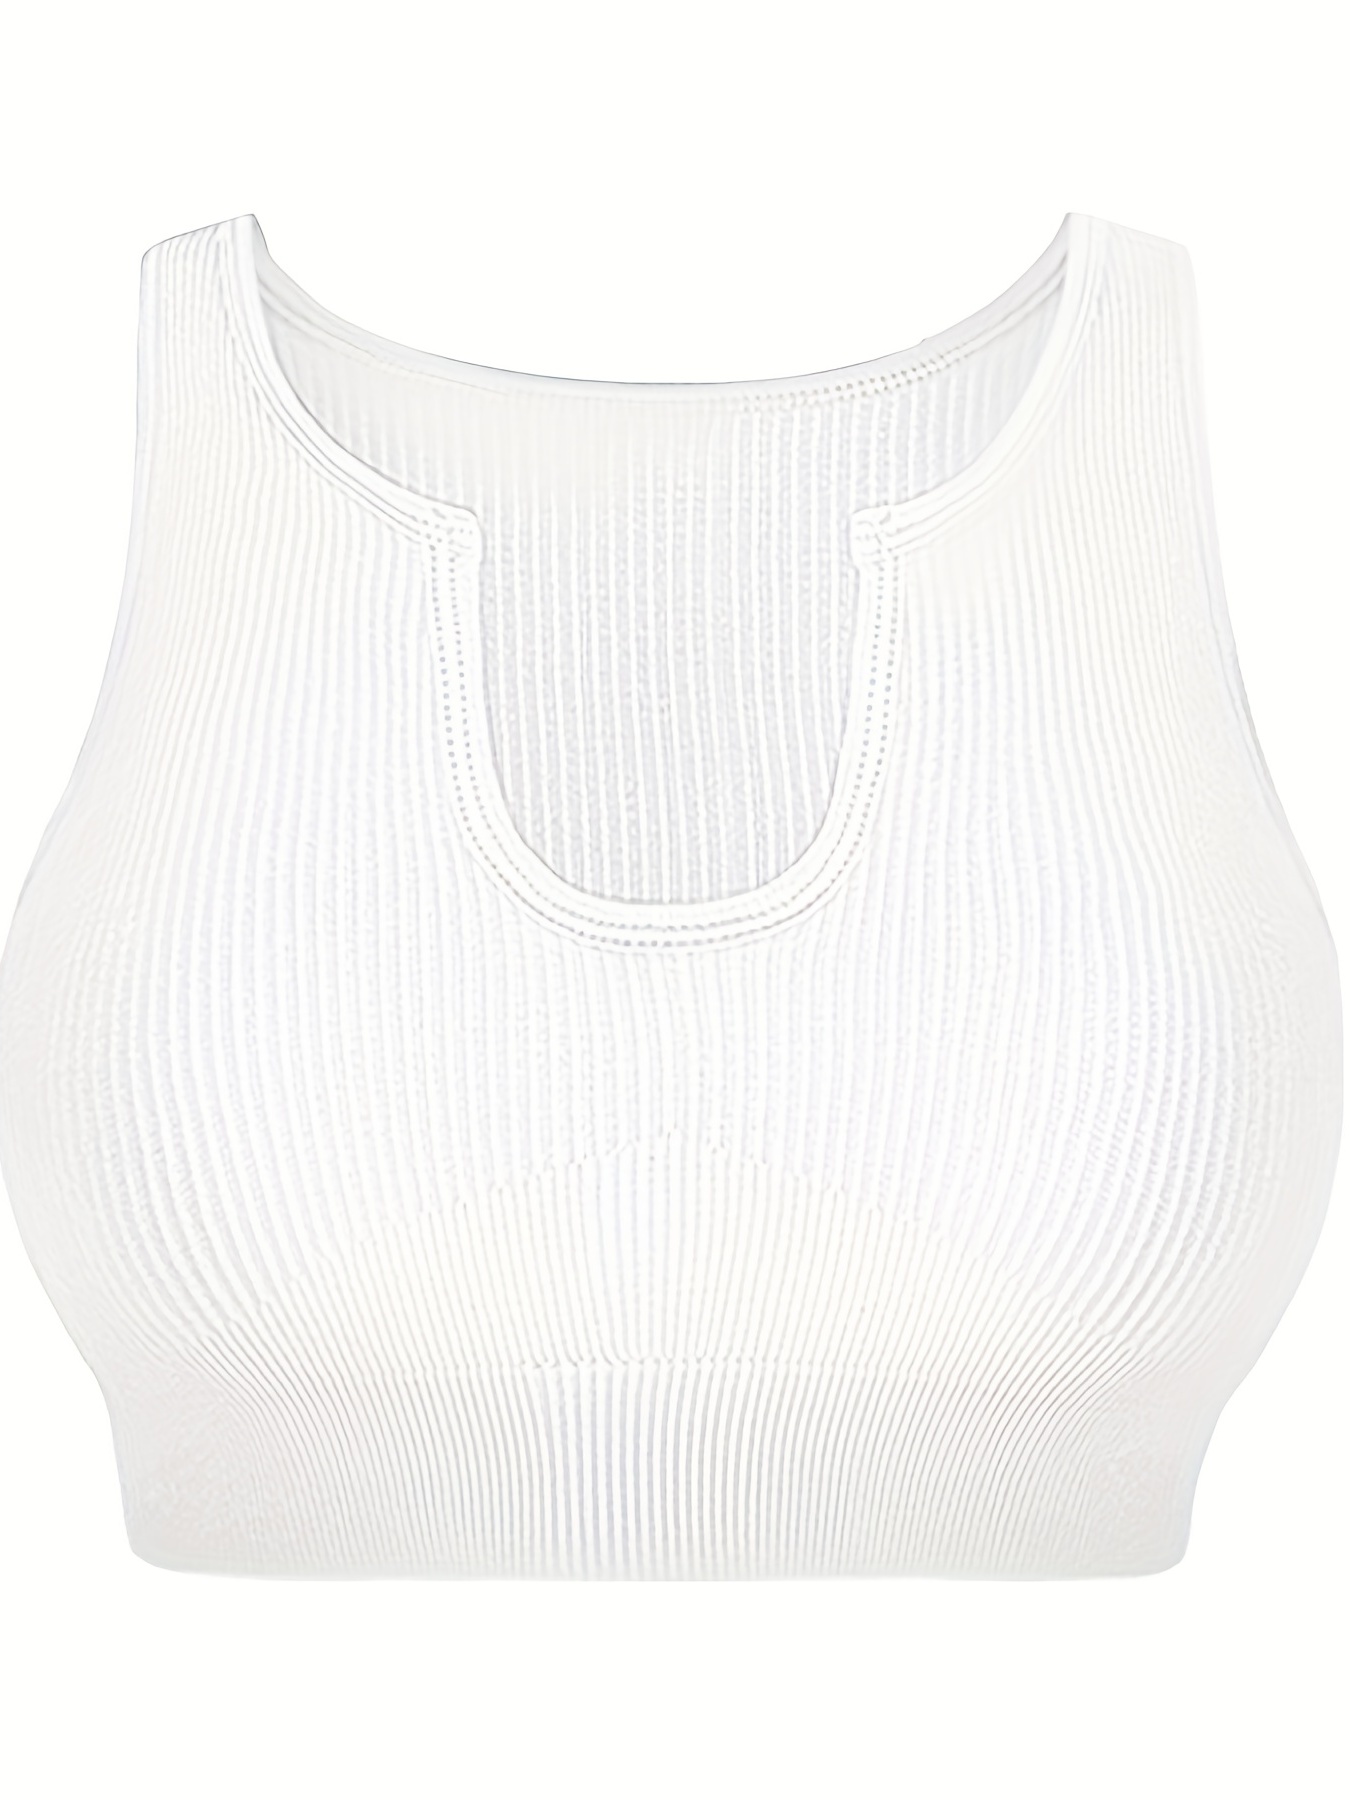 Scoop Neck Longline Sports Bras for Women Sexy Ribbed Adjustable